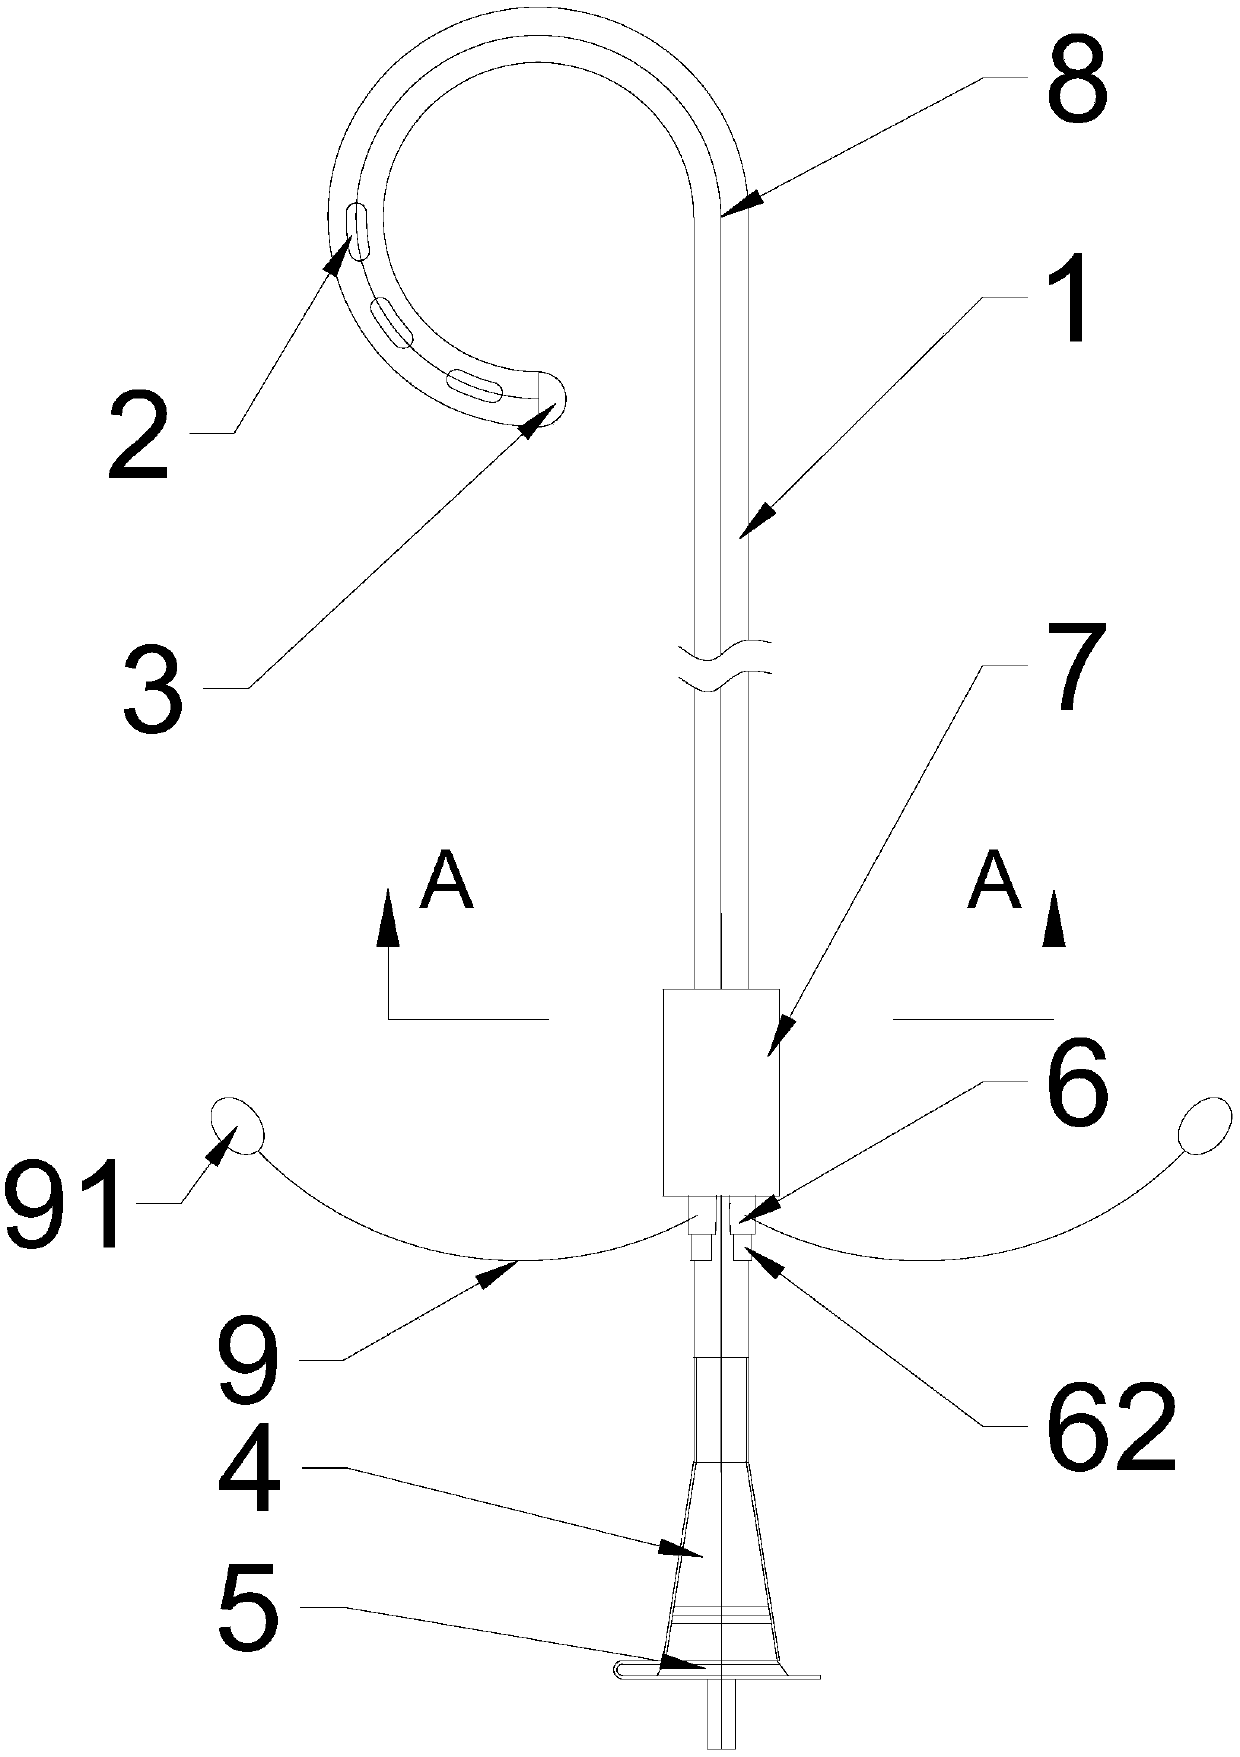 Multi-orifice nasogastric tube with fixing device and guide wire